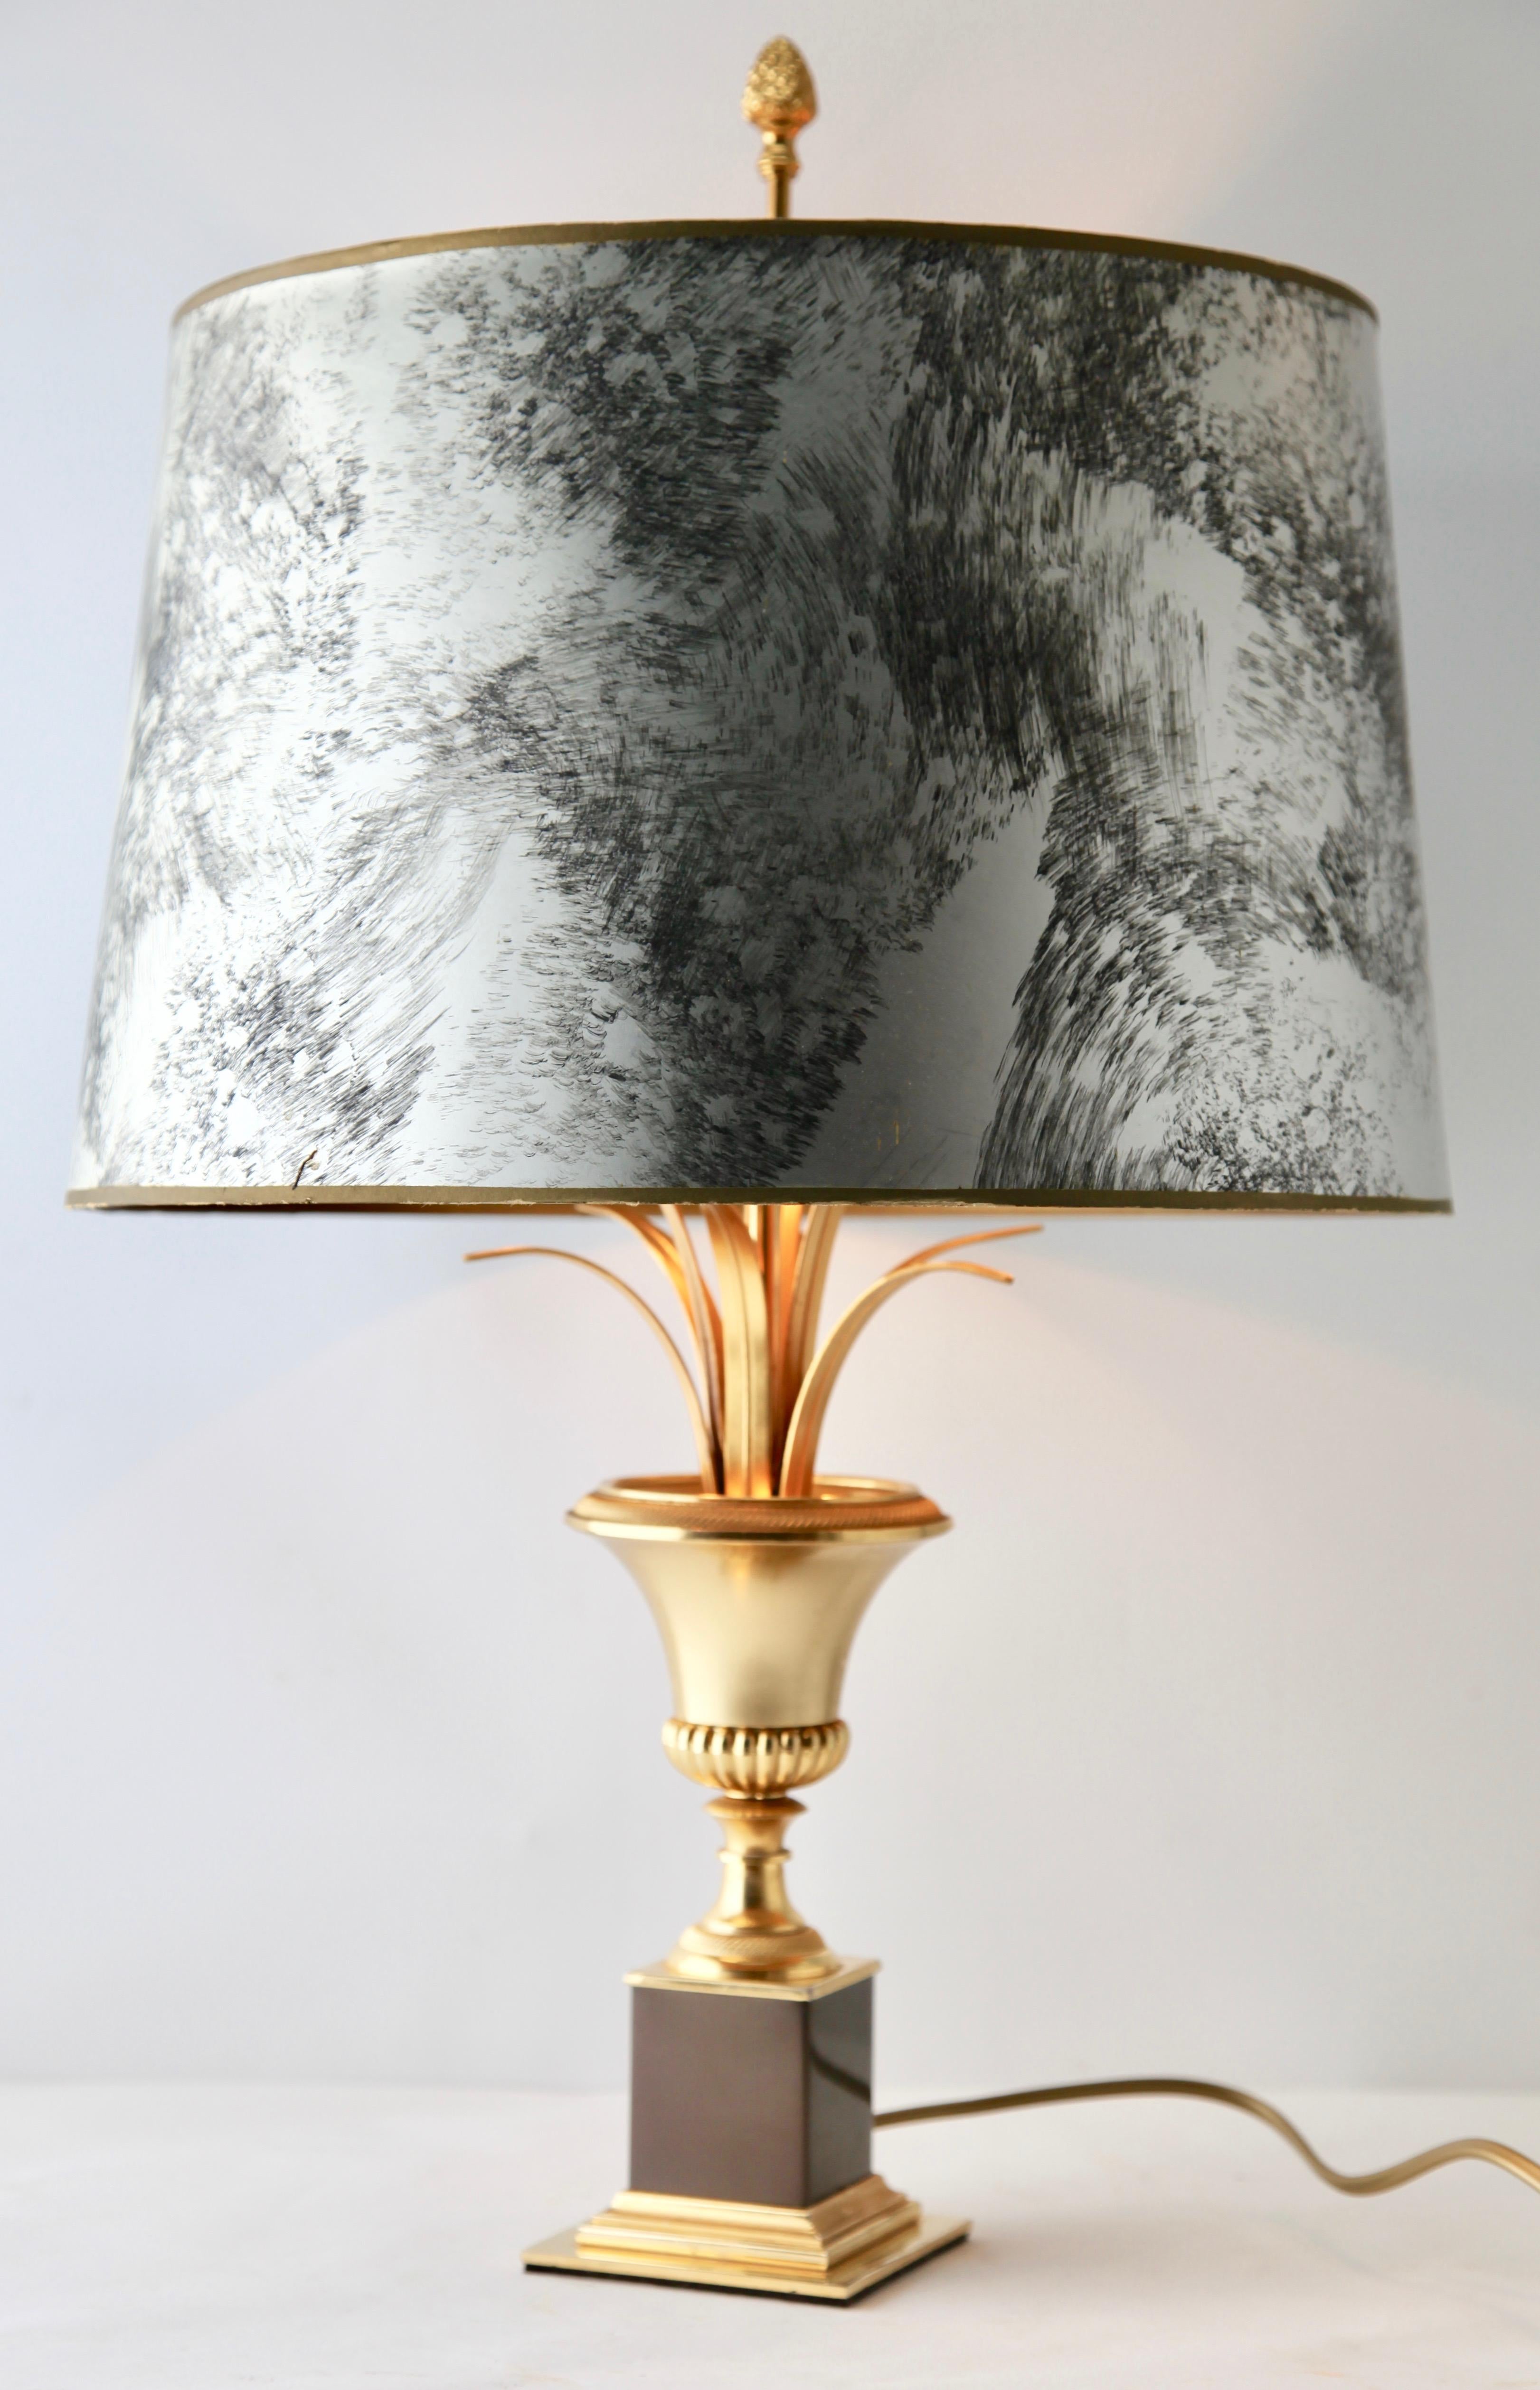 Gorgeous table lamp with golden base 
Made in France during the 1960s in the style of Maison Jansen.

In excellent condition (Original patina) and in full working order
And been re-wired with 2 fittings E14
And safe for immediate usage in the